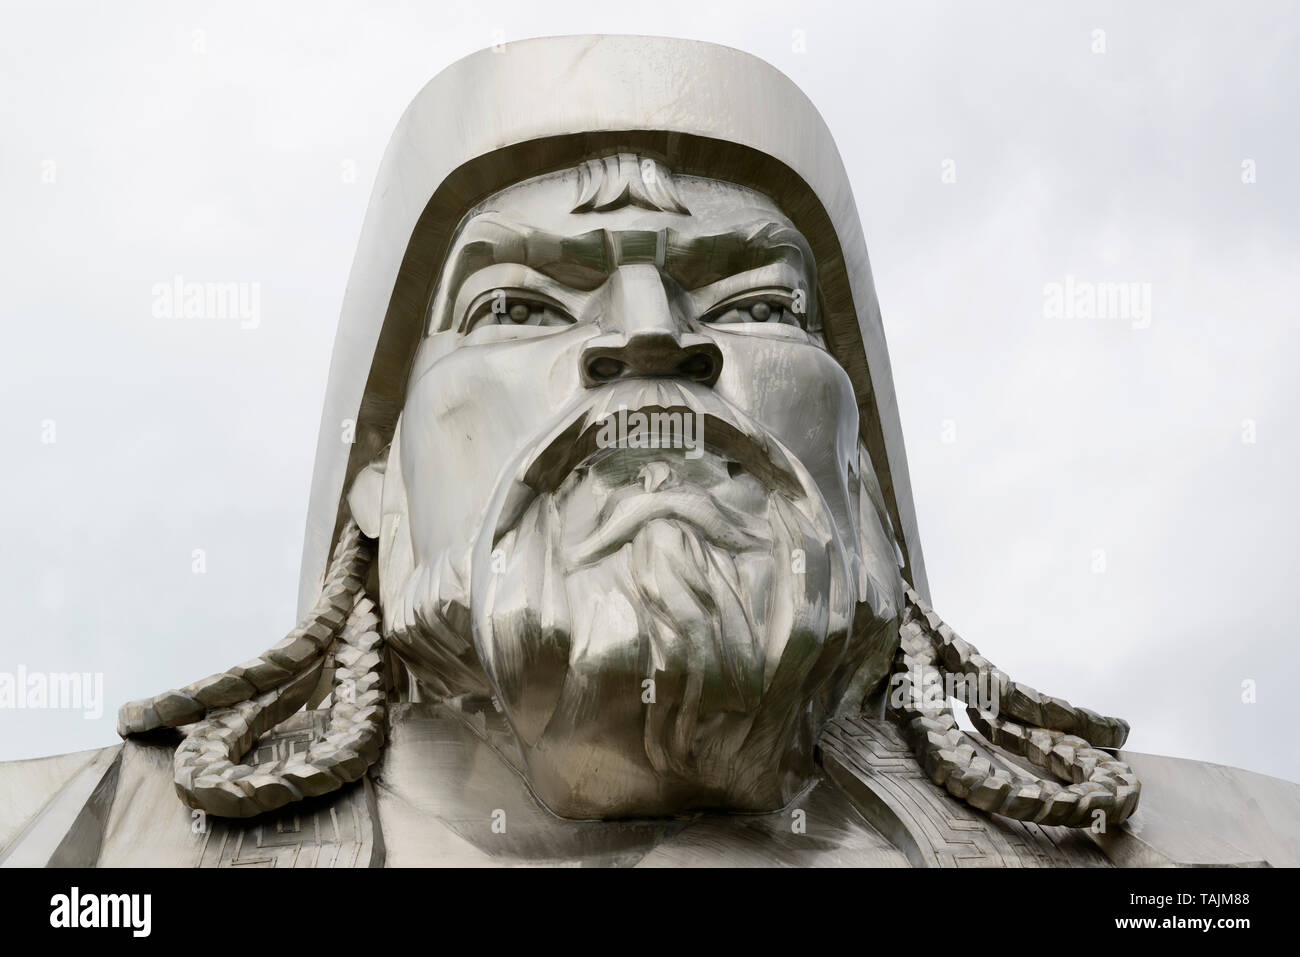 The Genghis Khan Equestrian Statue, part of the Genghis Khan Statue Complex, 54 km east of Ulaanbaatar, Mongolia. Stock Photo